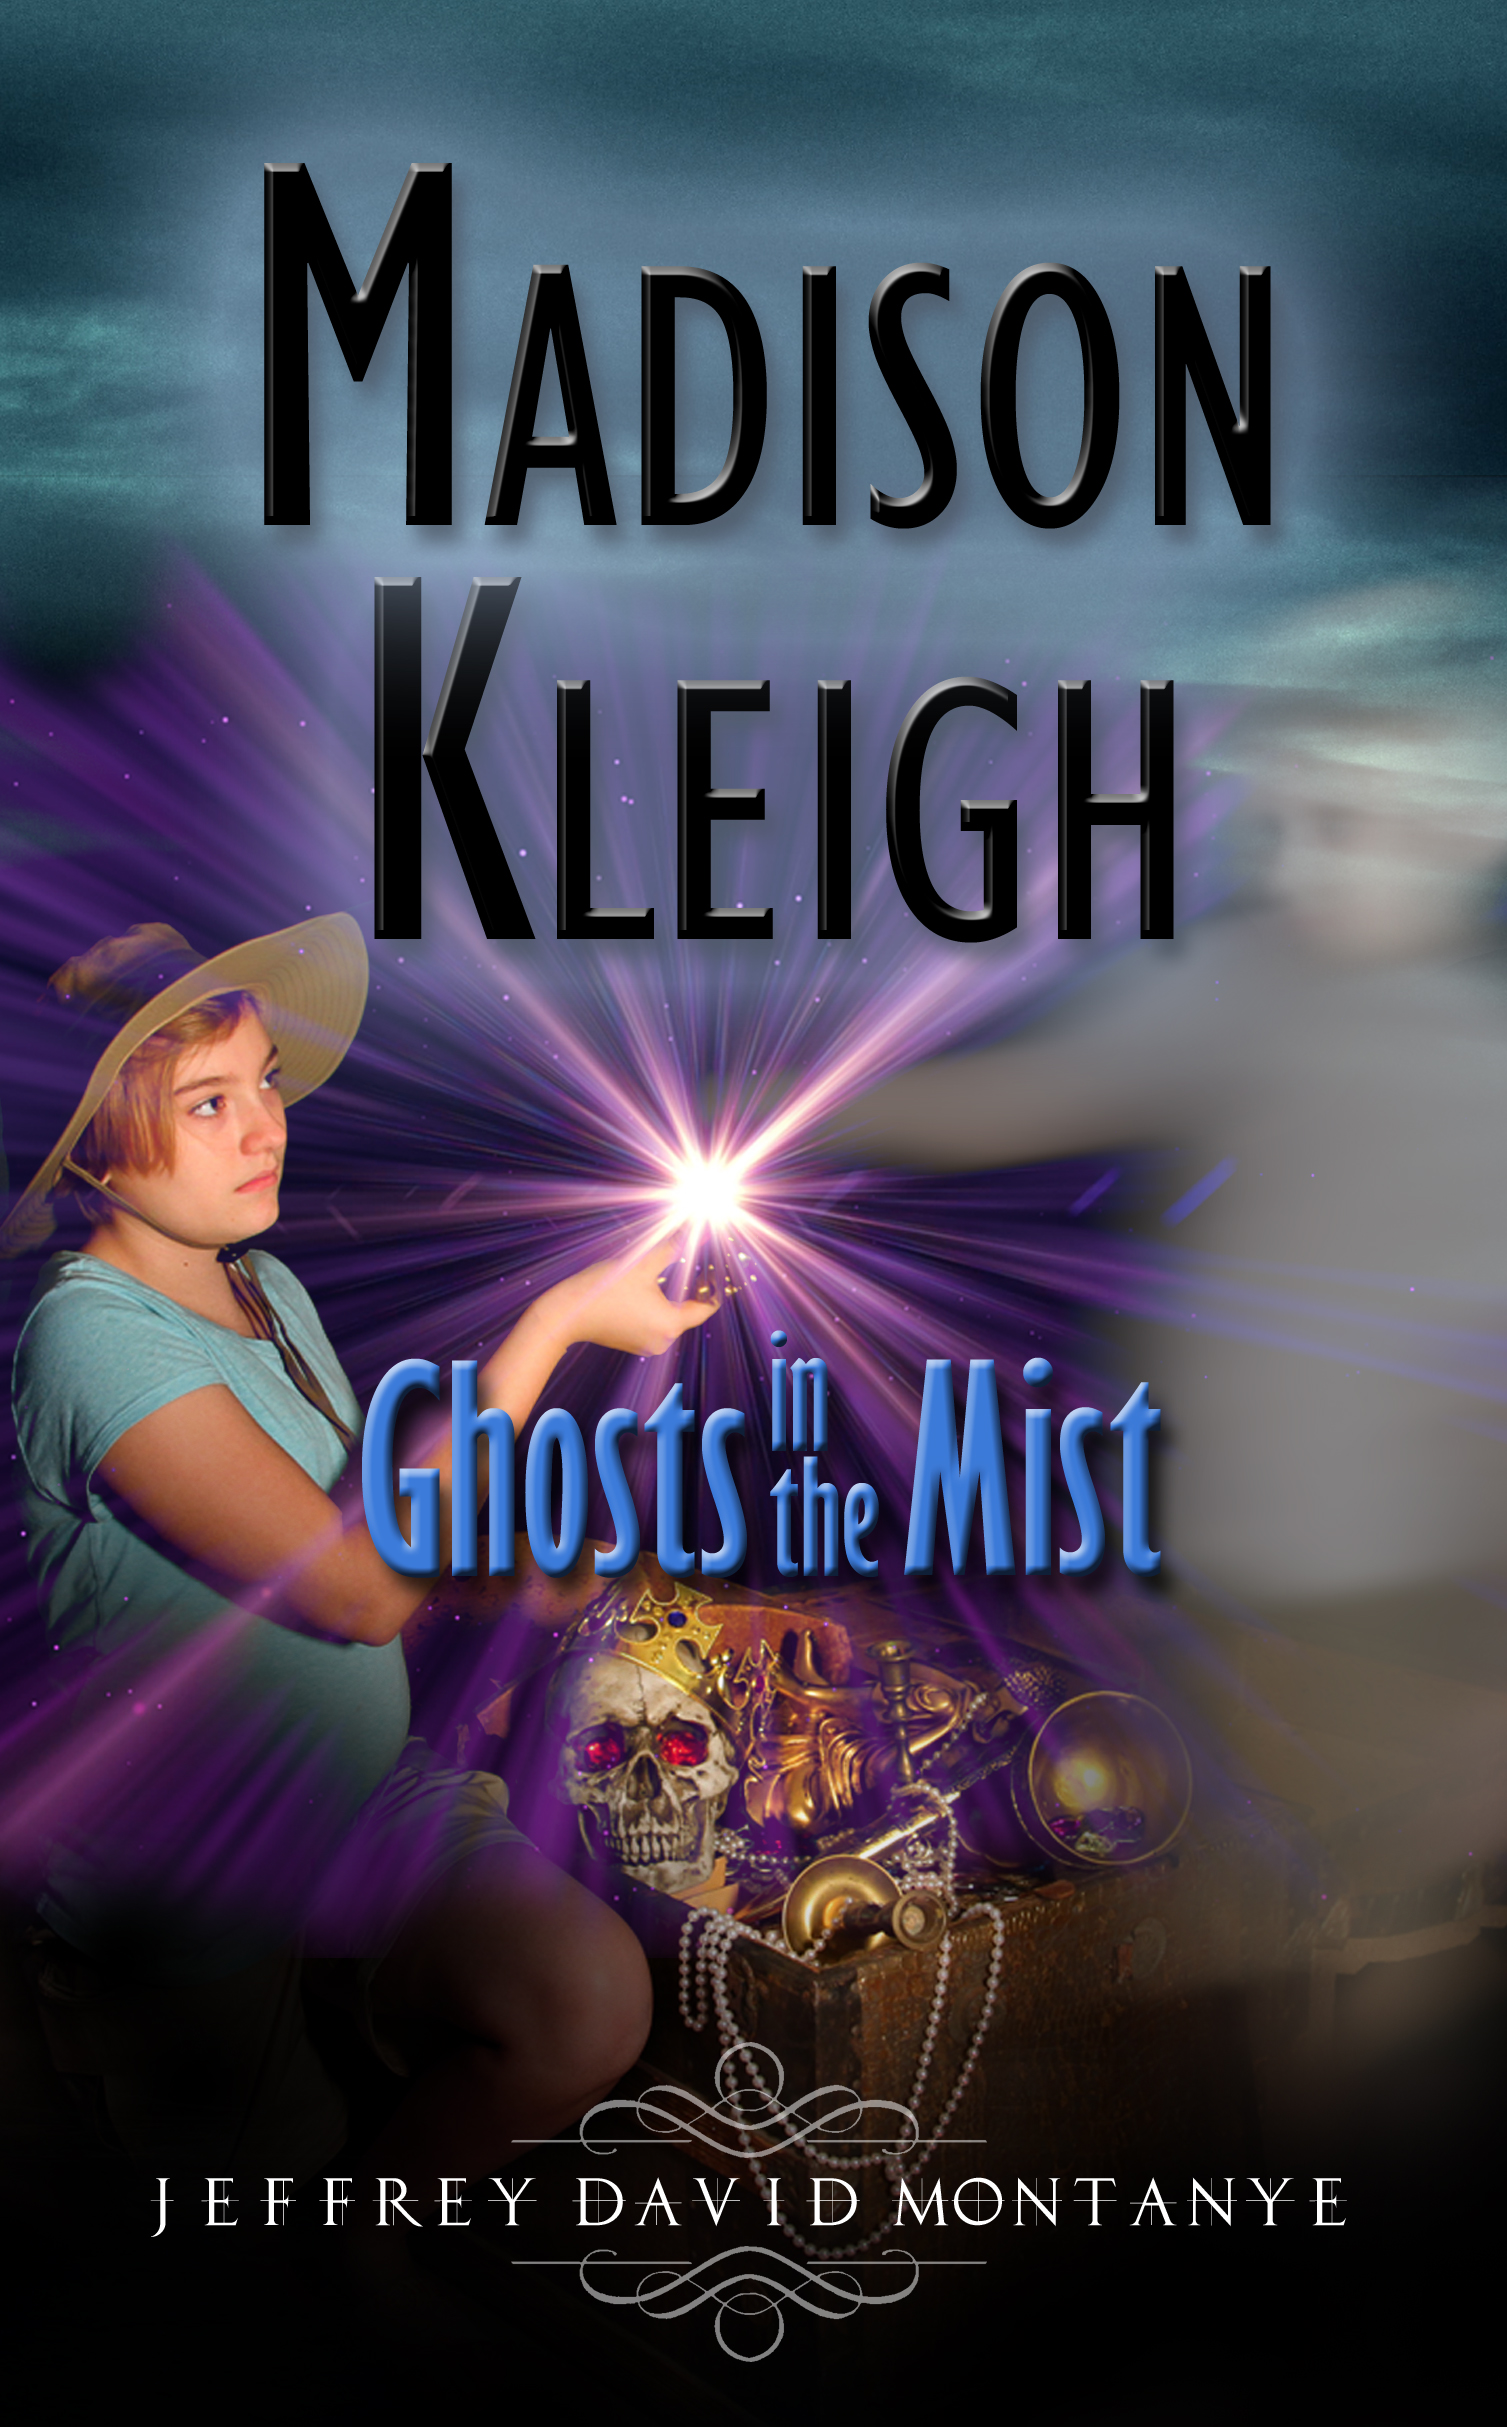 Madison Kleigh - Ghosts in the Mist by Jeffrey David Montanye